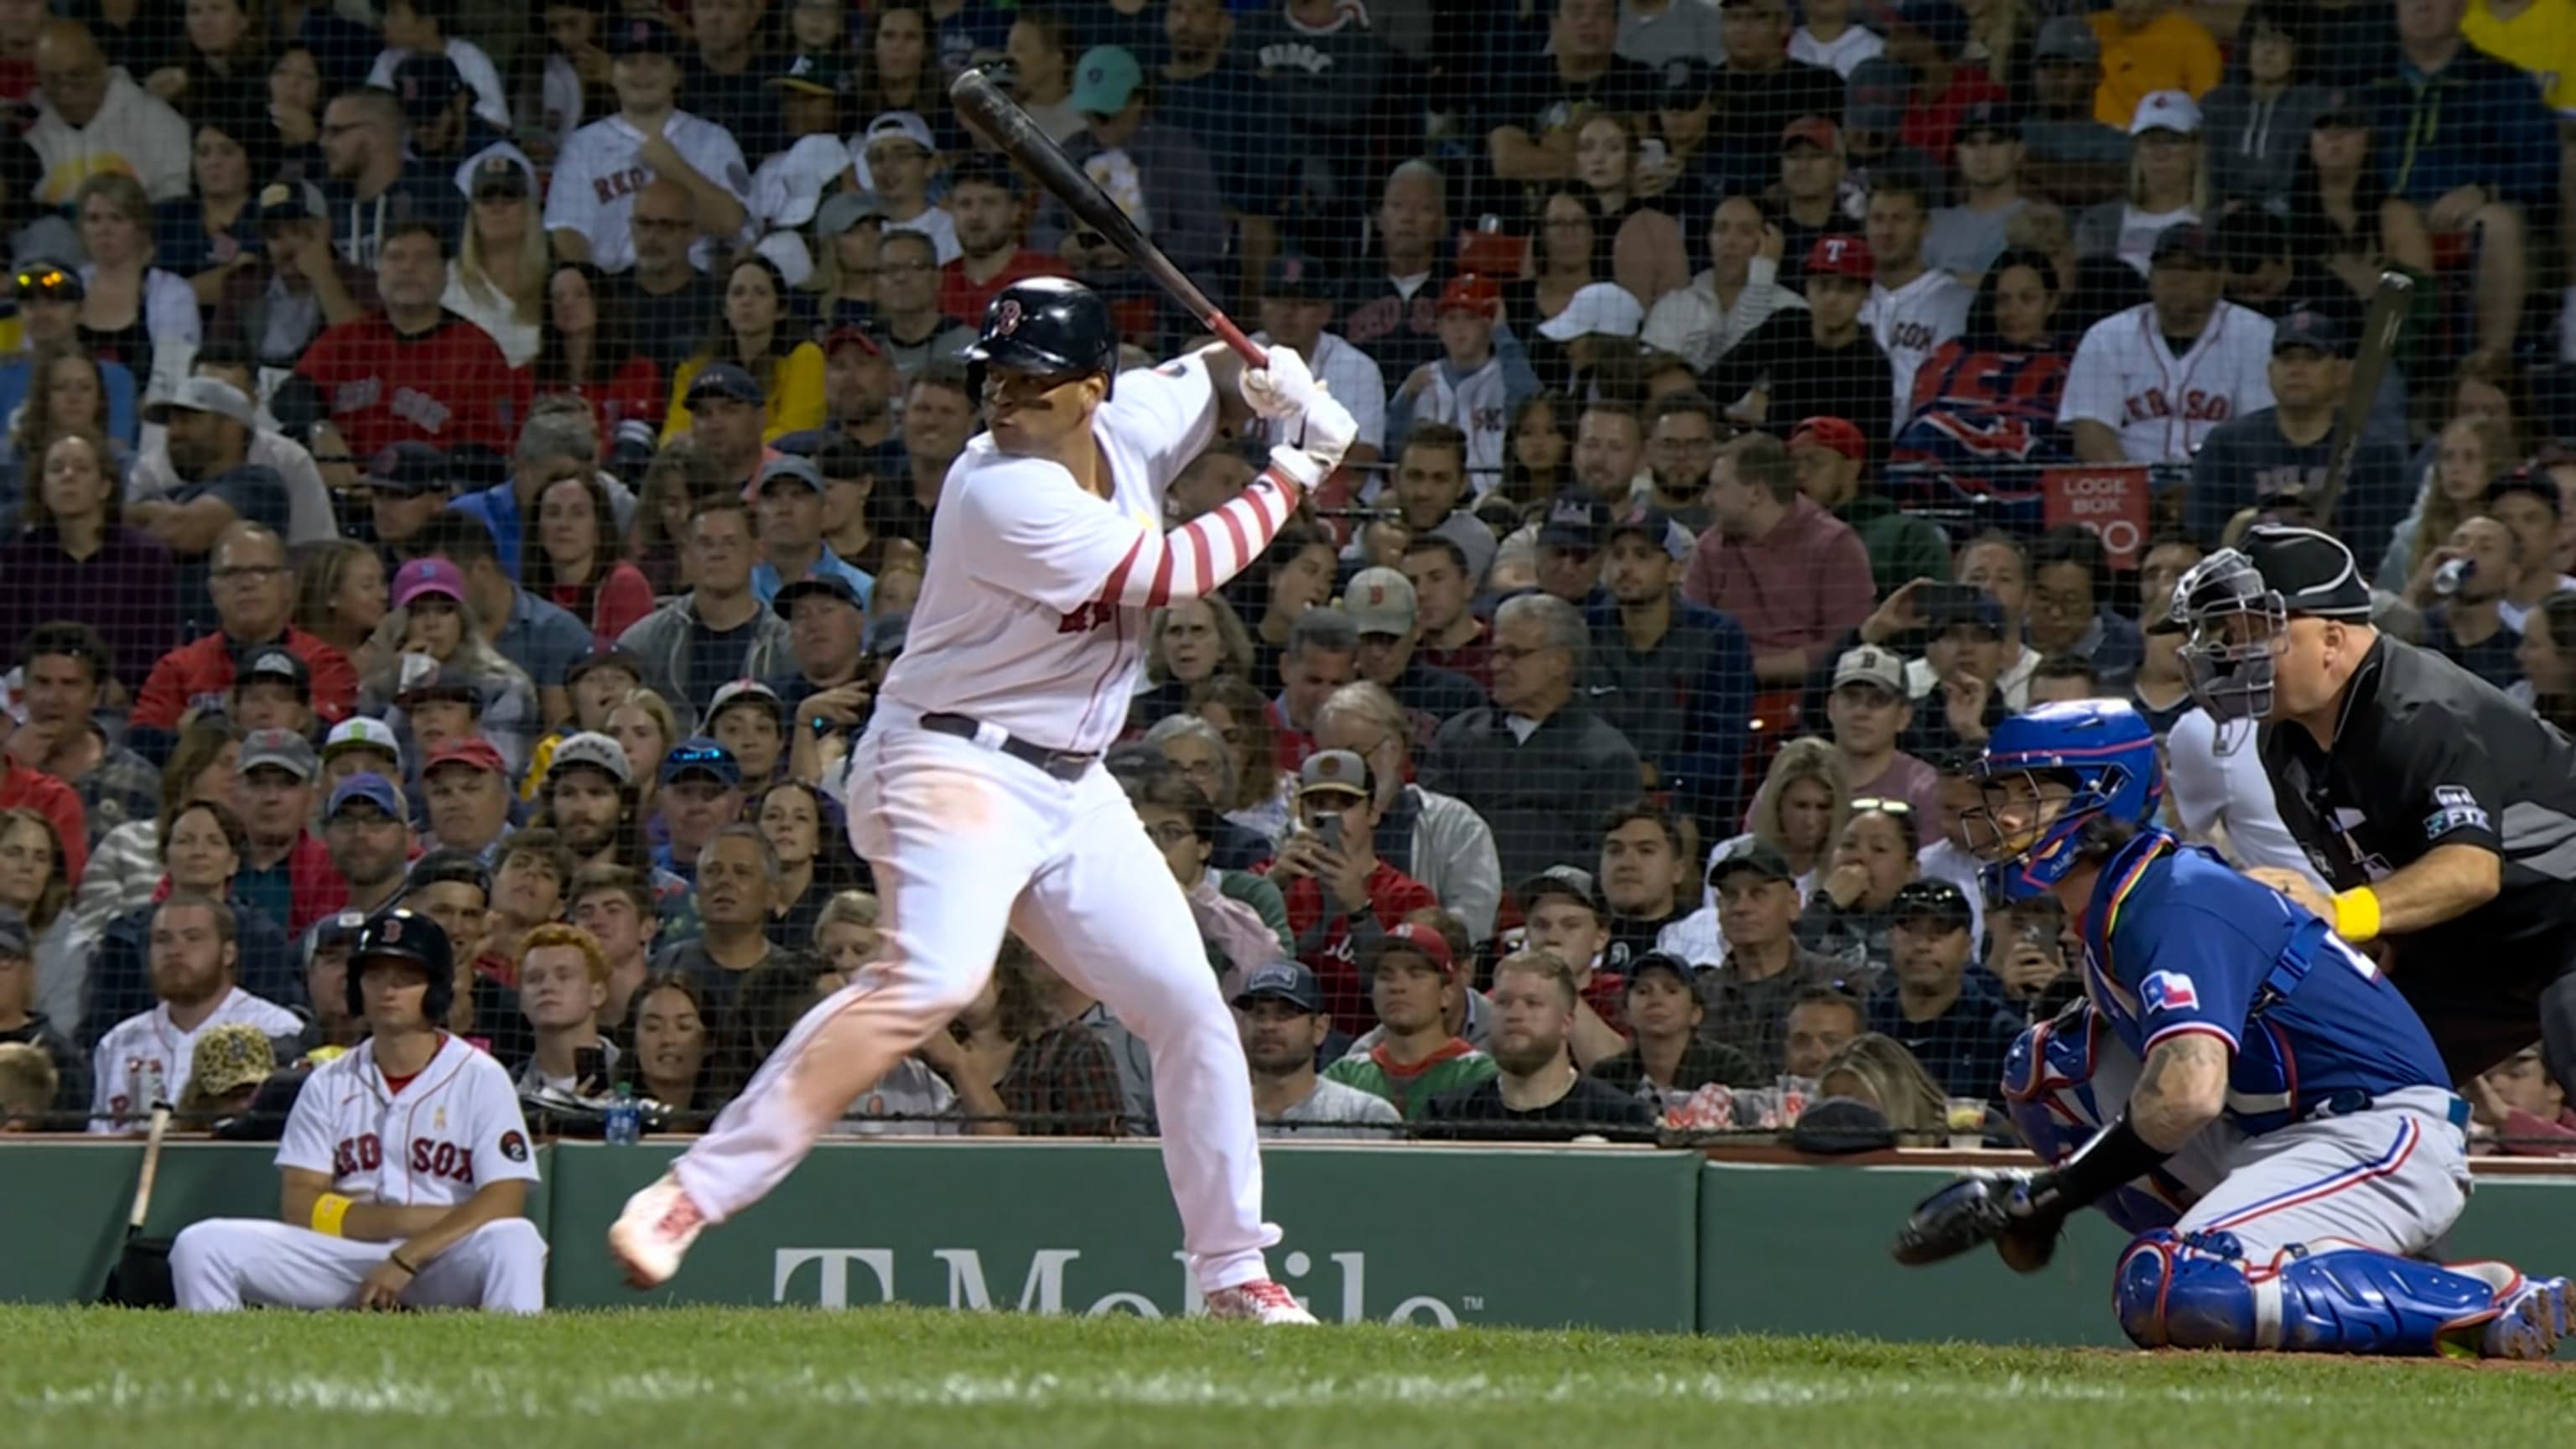 Red Sox's Wong records hit in memorable start